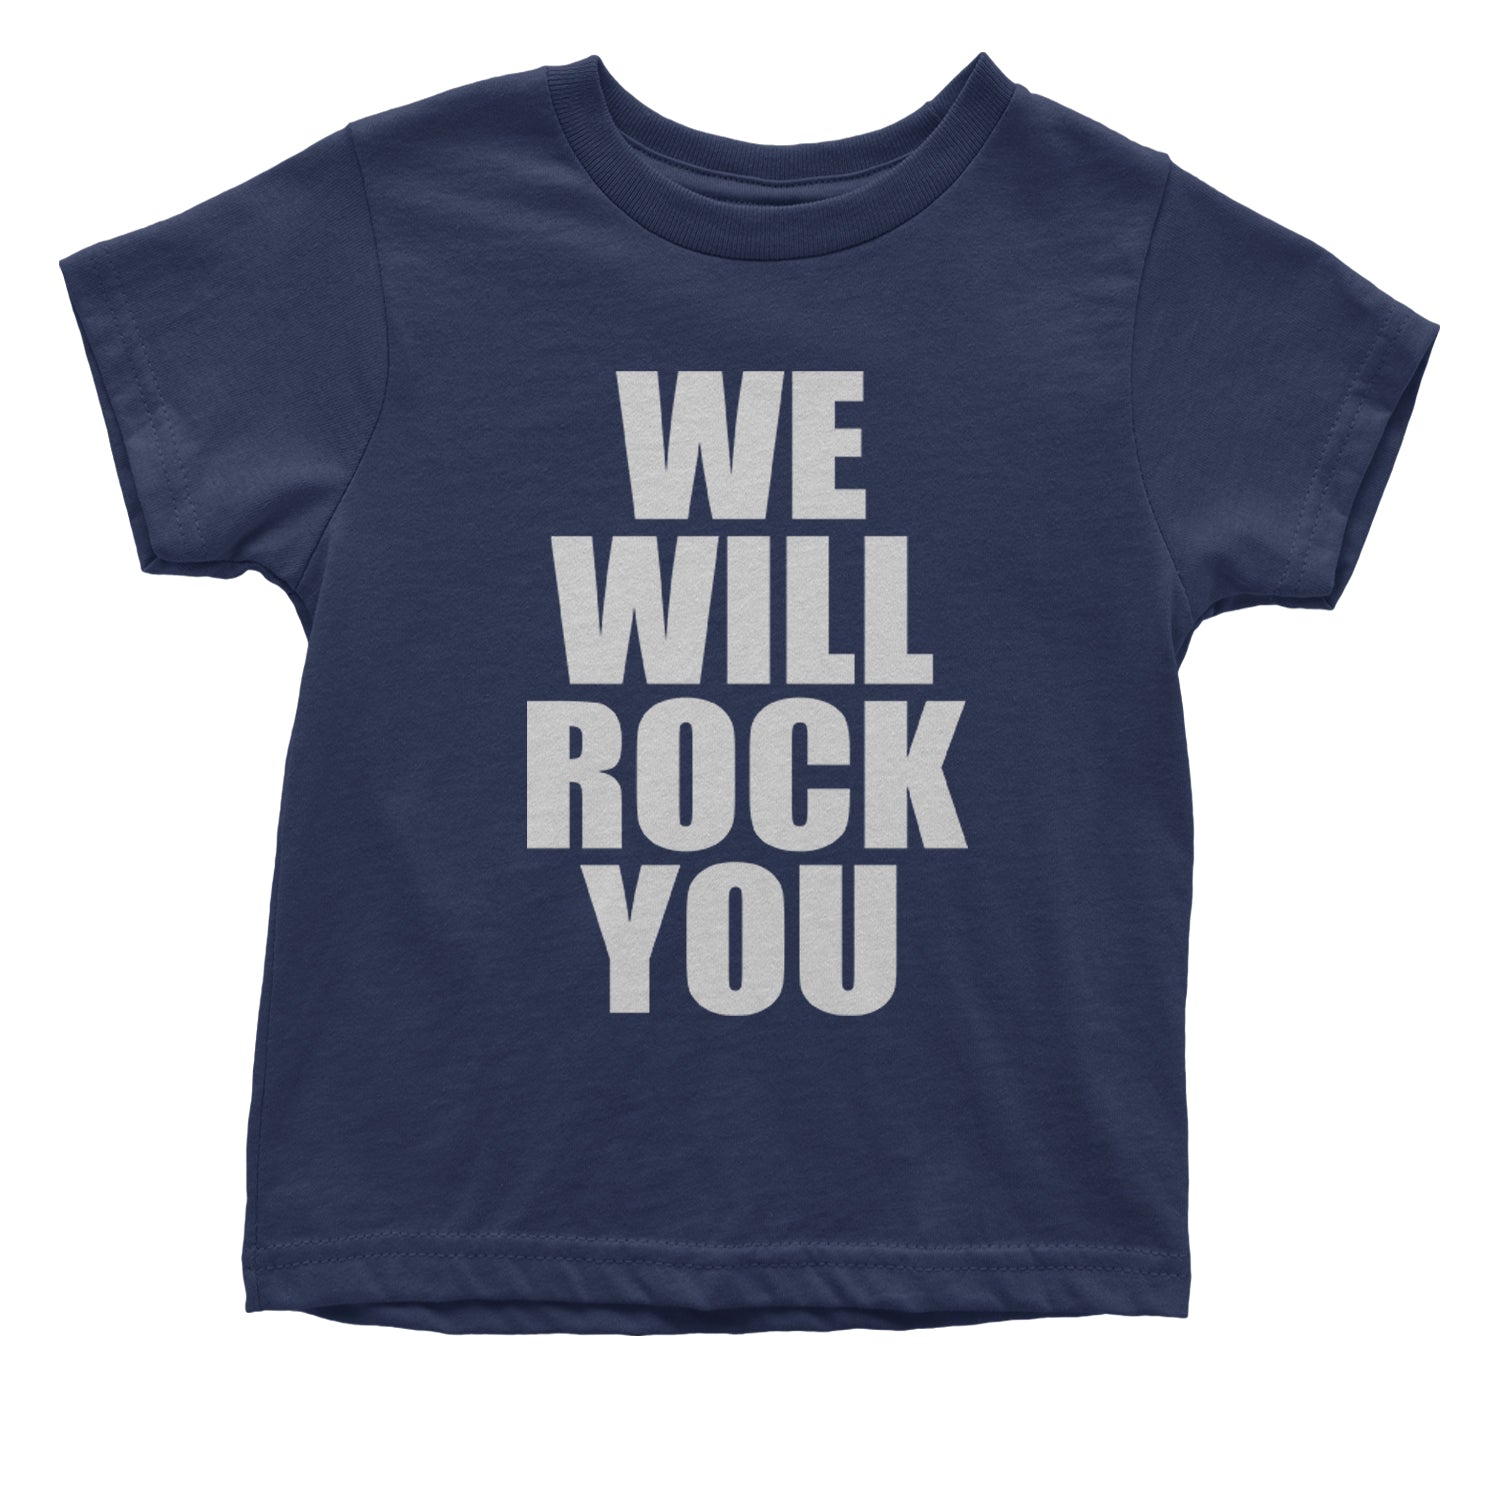 We Will Rock You Infant One-Piece Romper Bodysuit and Toddler T-shirt #expressiontees by Expression Tees